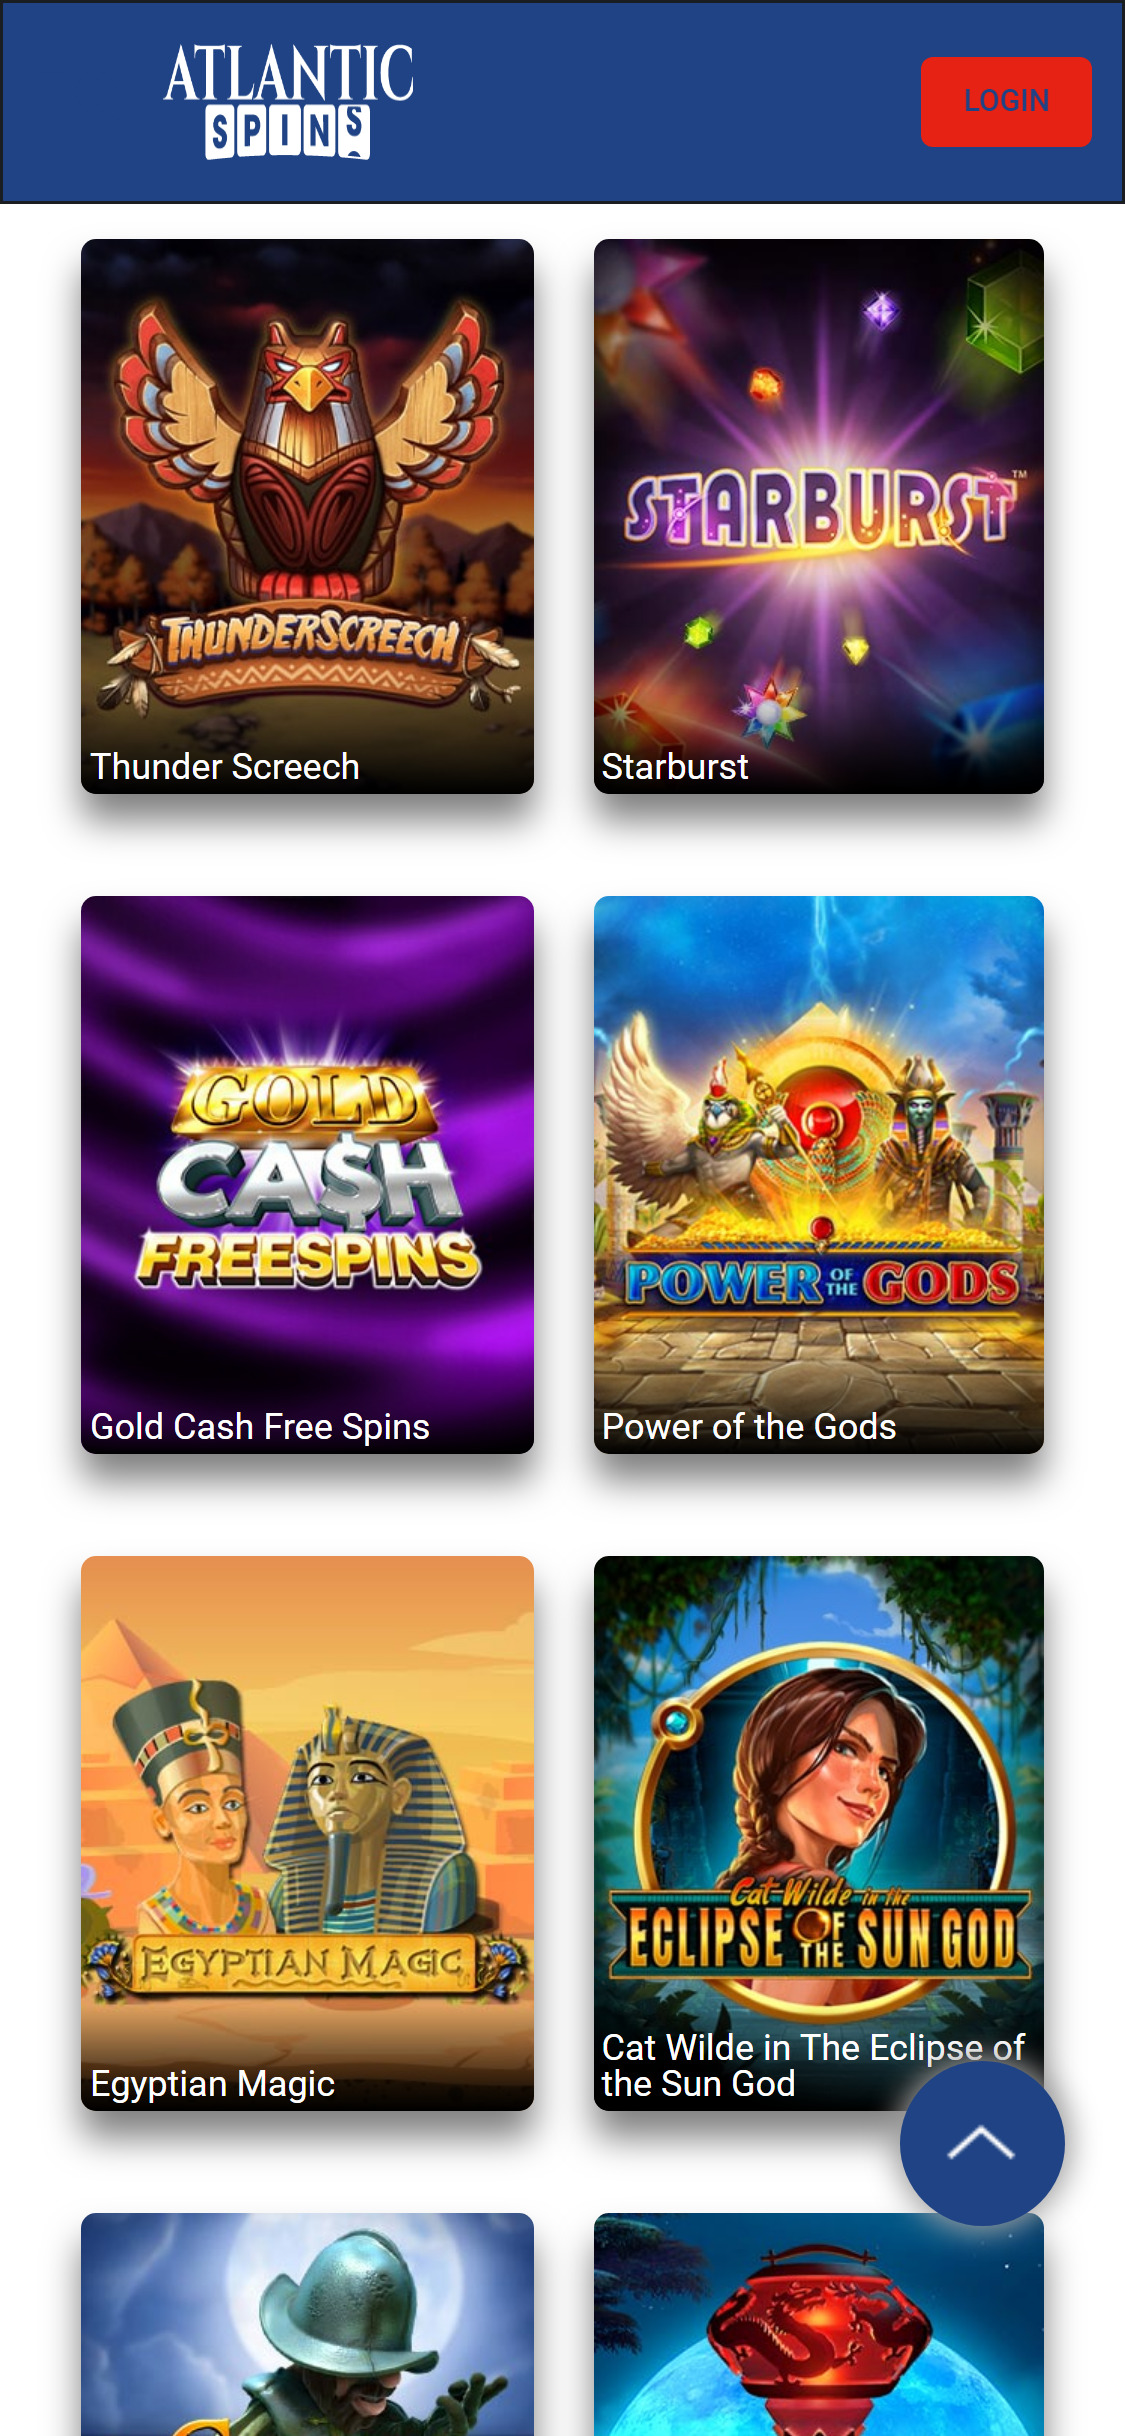 Atlantic Spins Casino Mobile Games Review